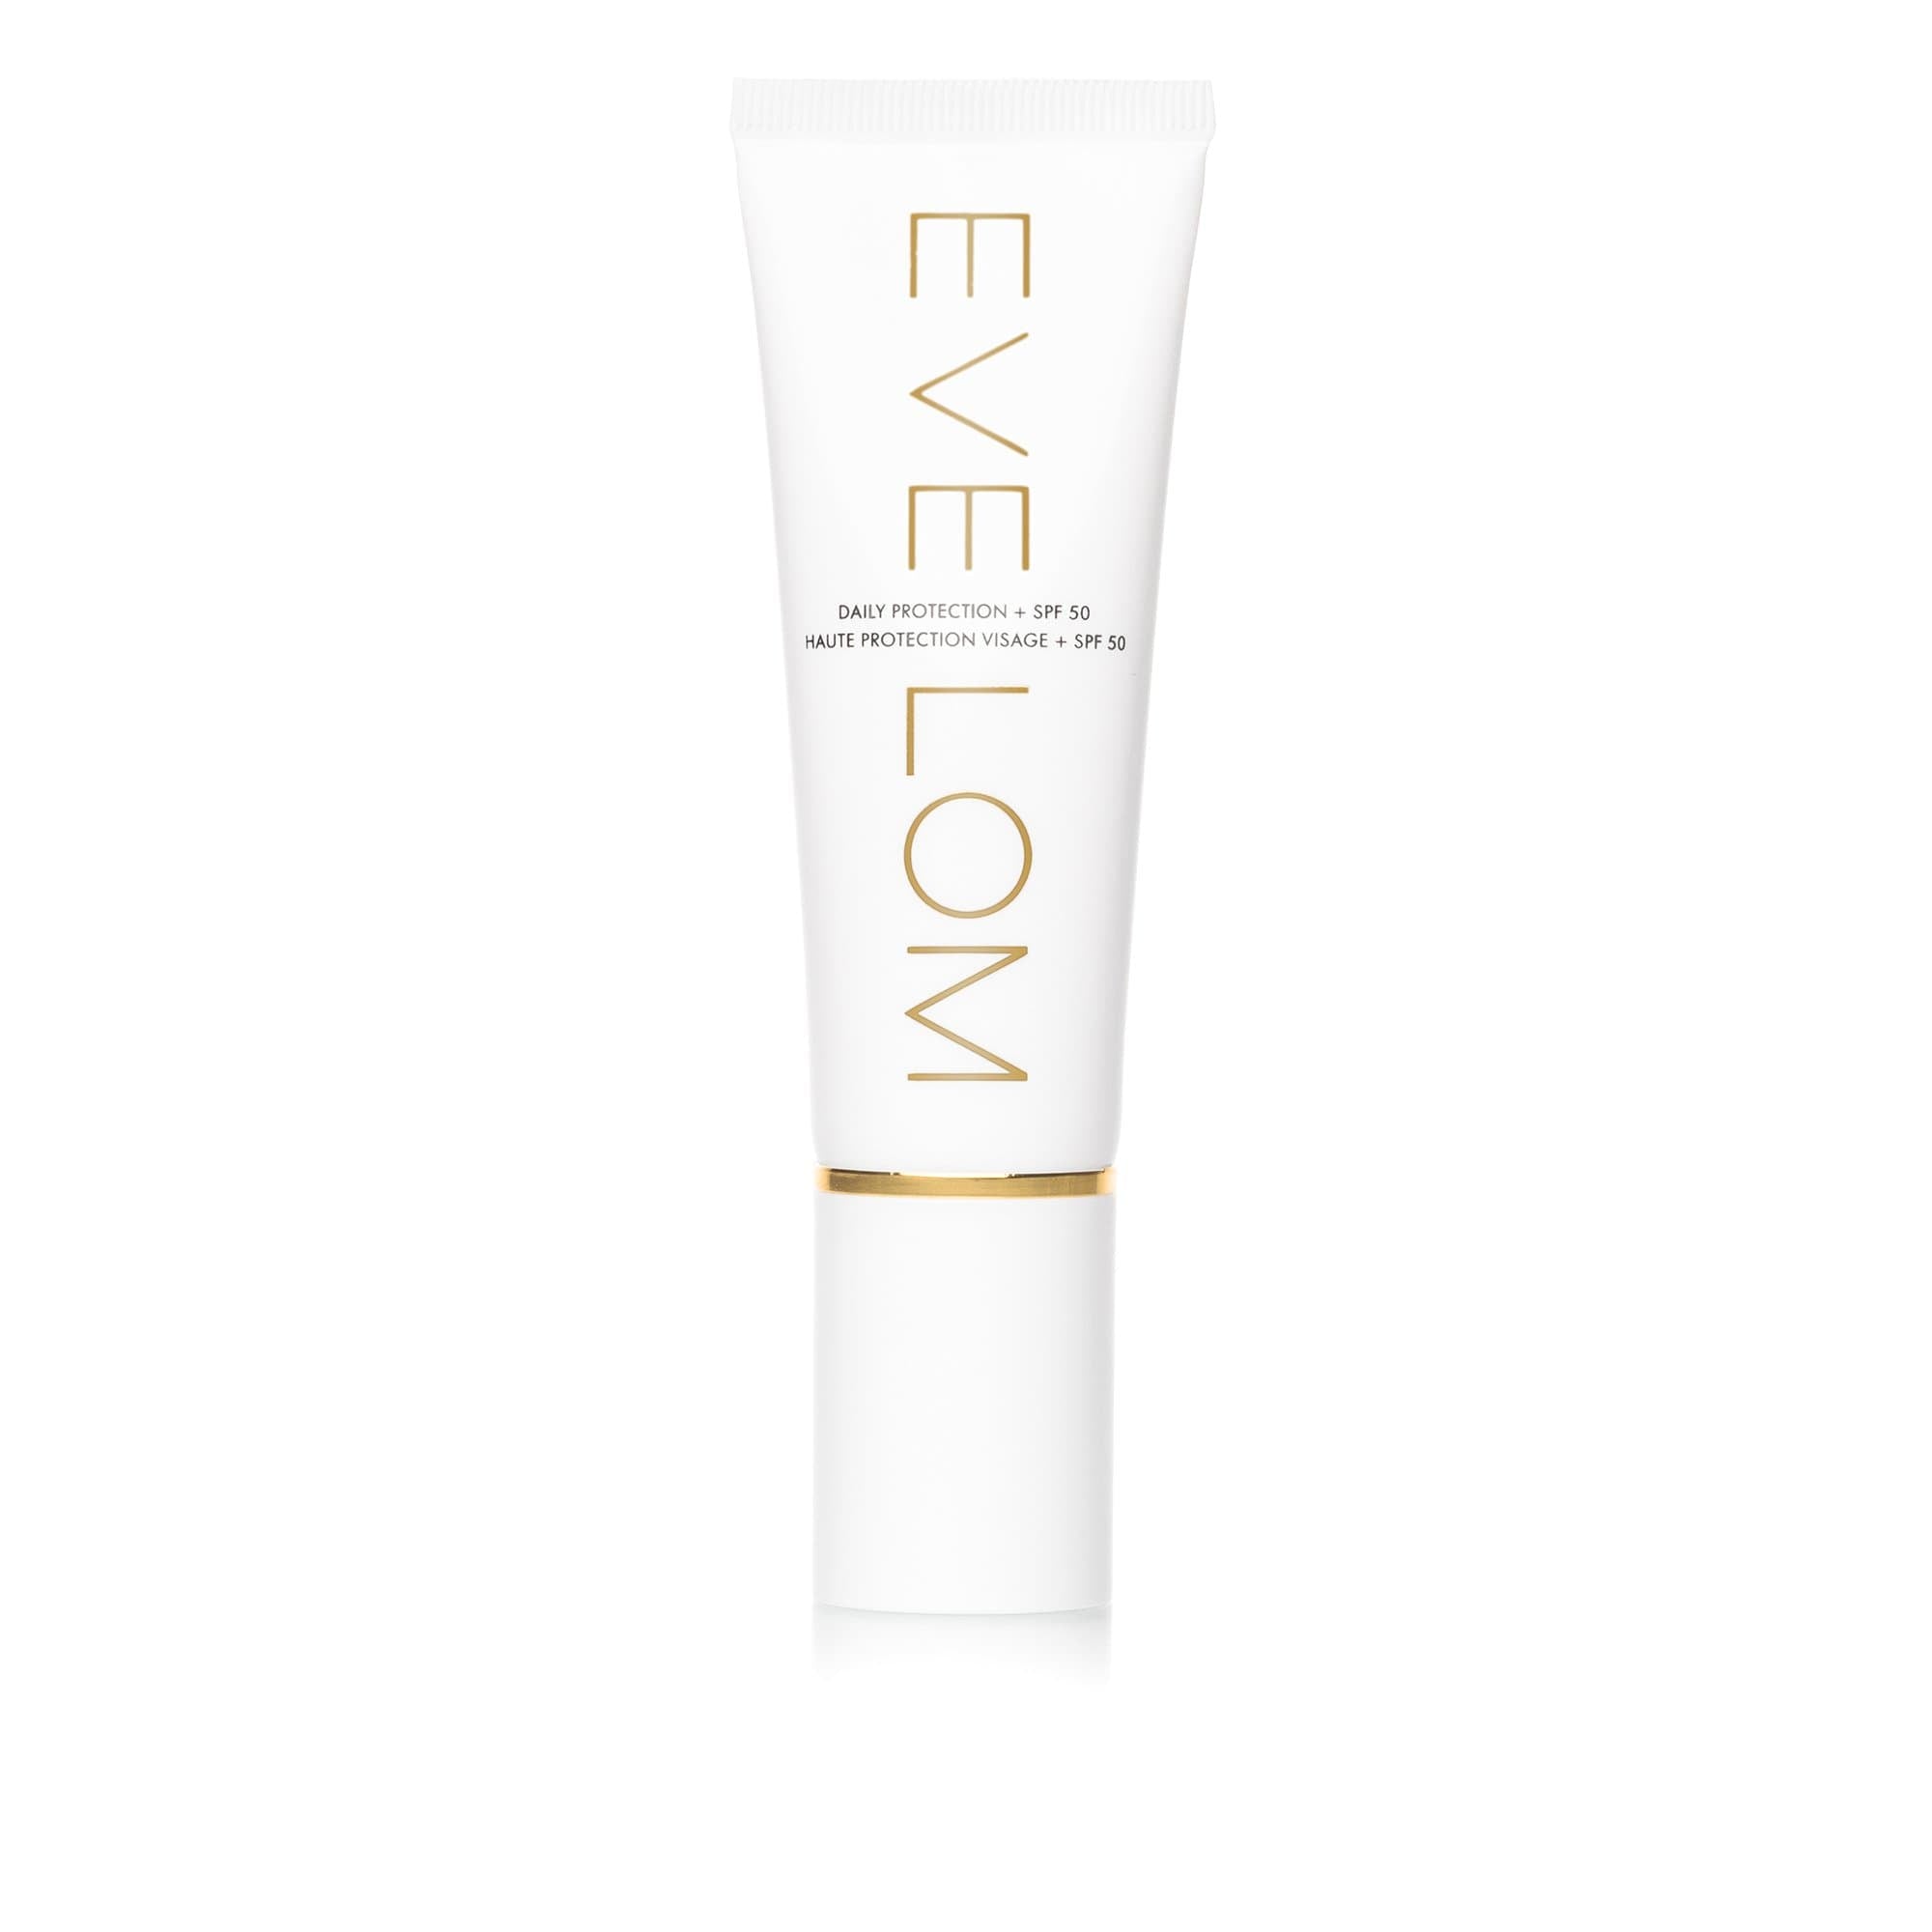 Daily Protection + SPF 50 EVE LOM Protector diario